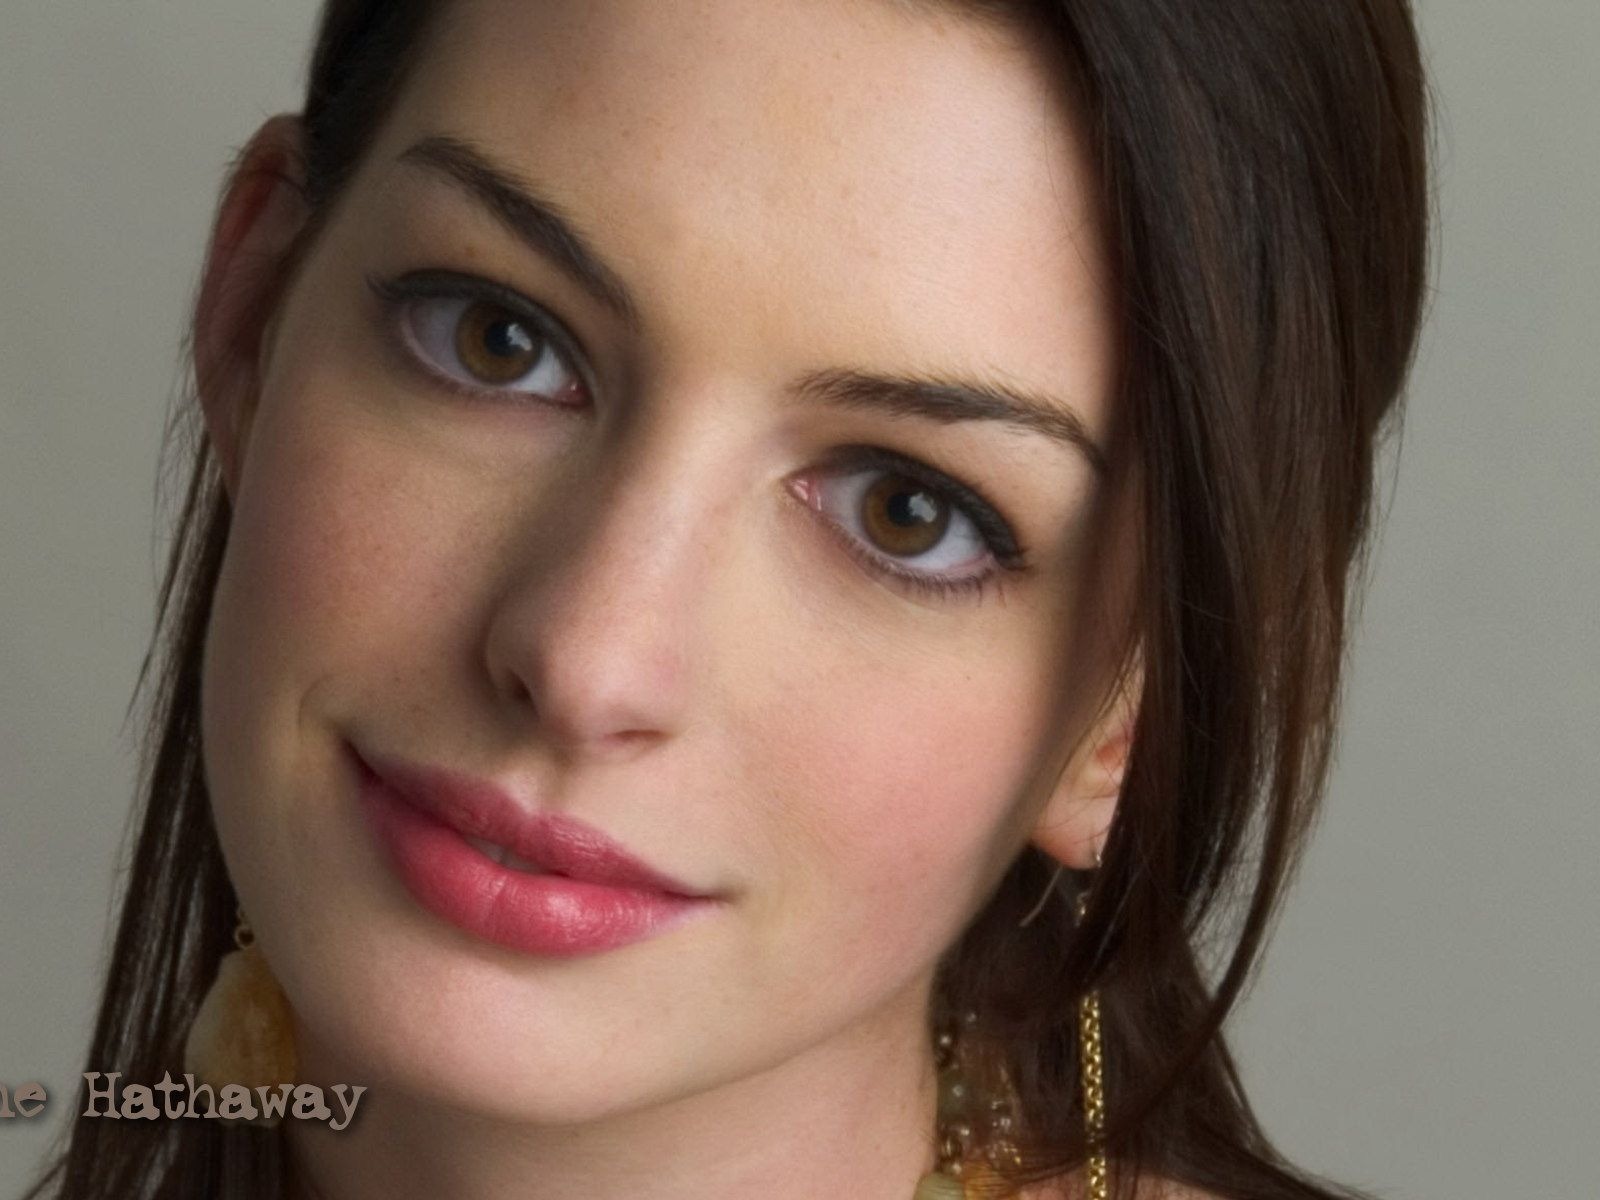 Anne Hathaway #042 - 1600x1200 Wallpapers Pictures Photos Images